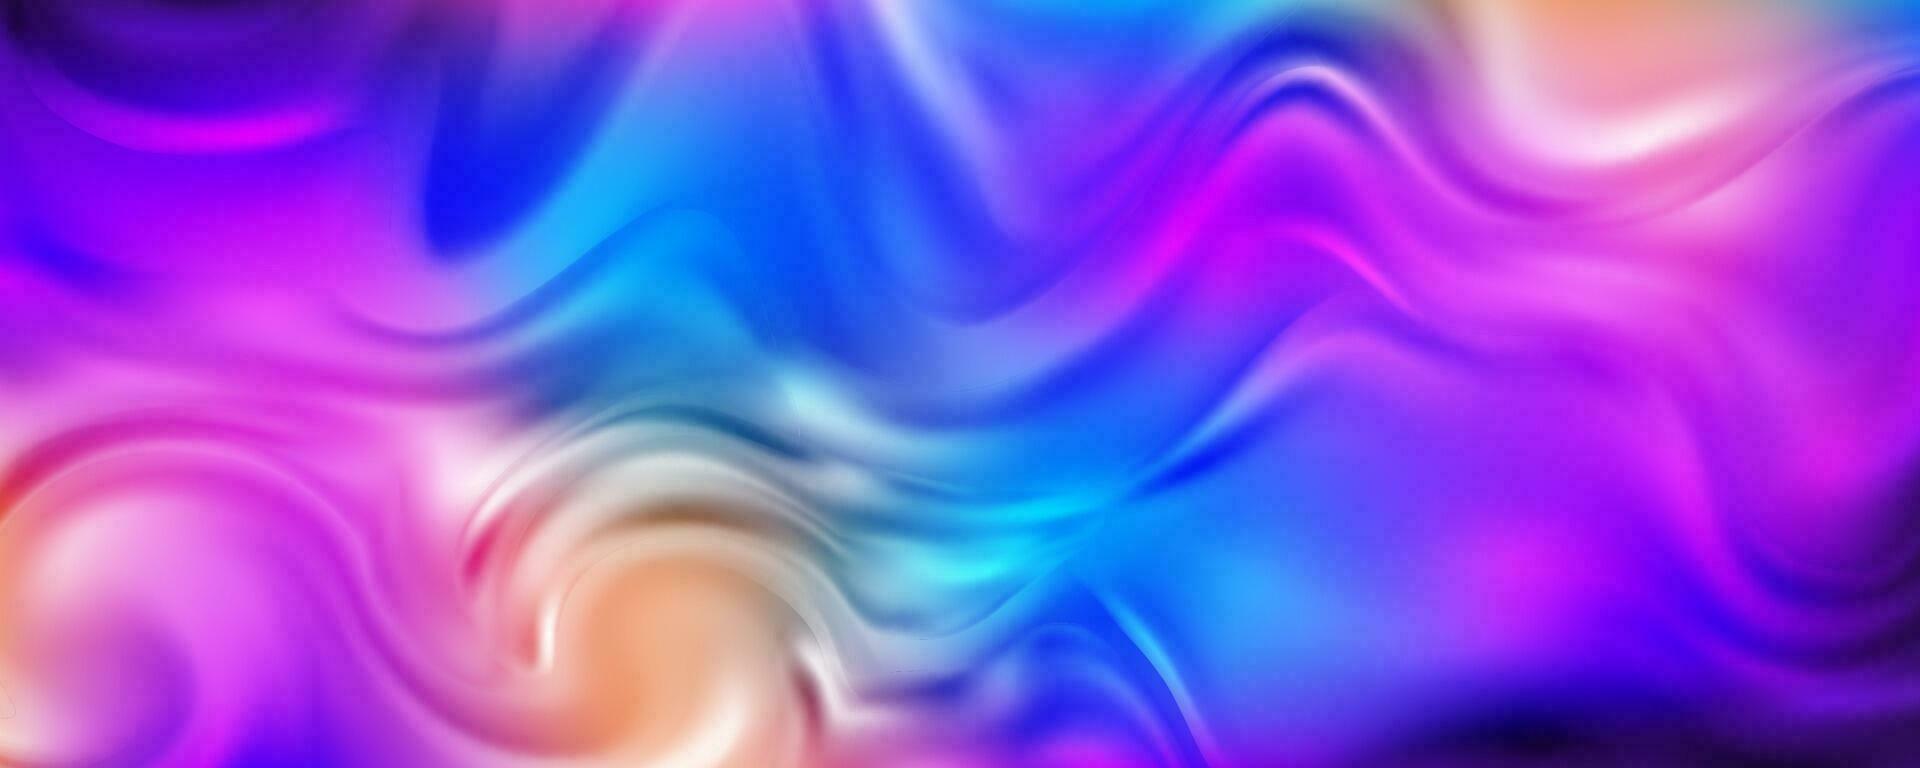 Rainbow background with waves of fluid. Abstract gradient wallpaper with bright vibrant colors. Vector unicorn holographic backdrop.